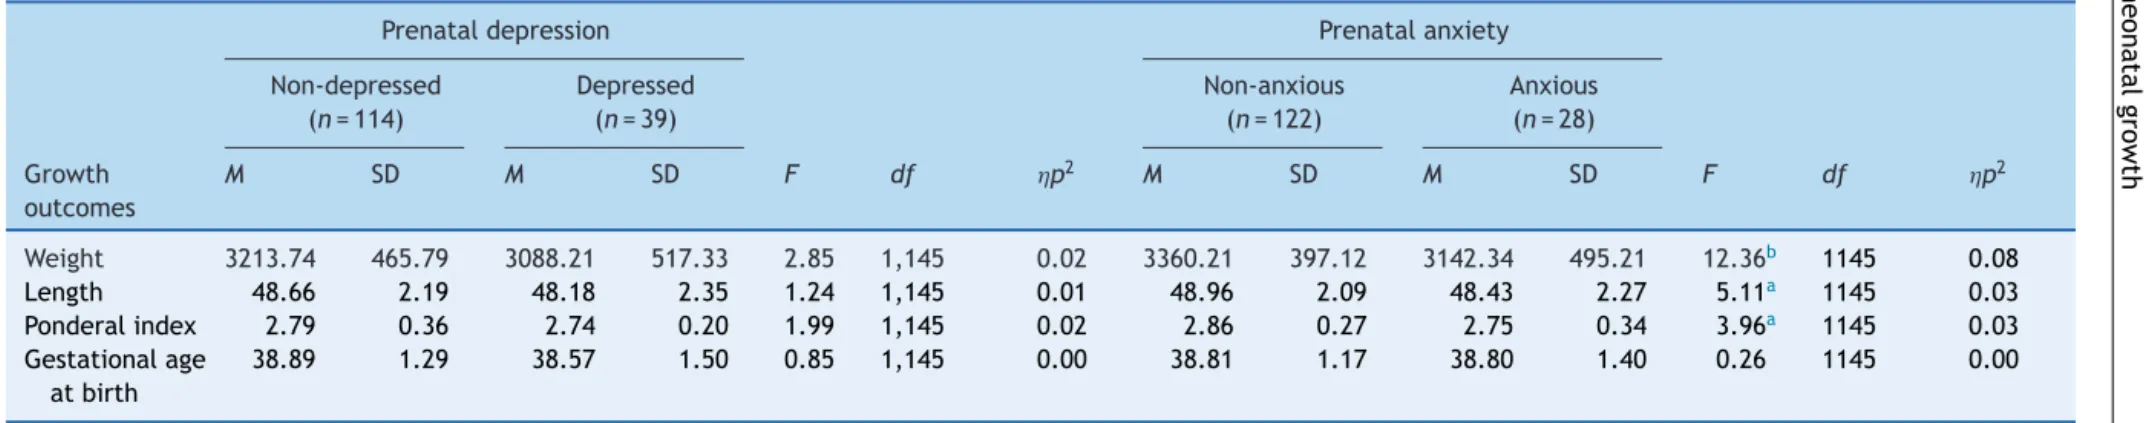 Table 3 The effect of maternal prenatal depression and anxiety on neonatal growth outcomes.